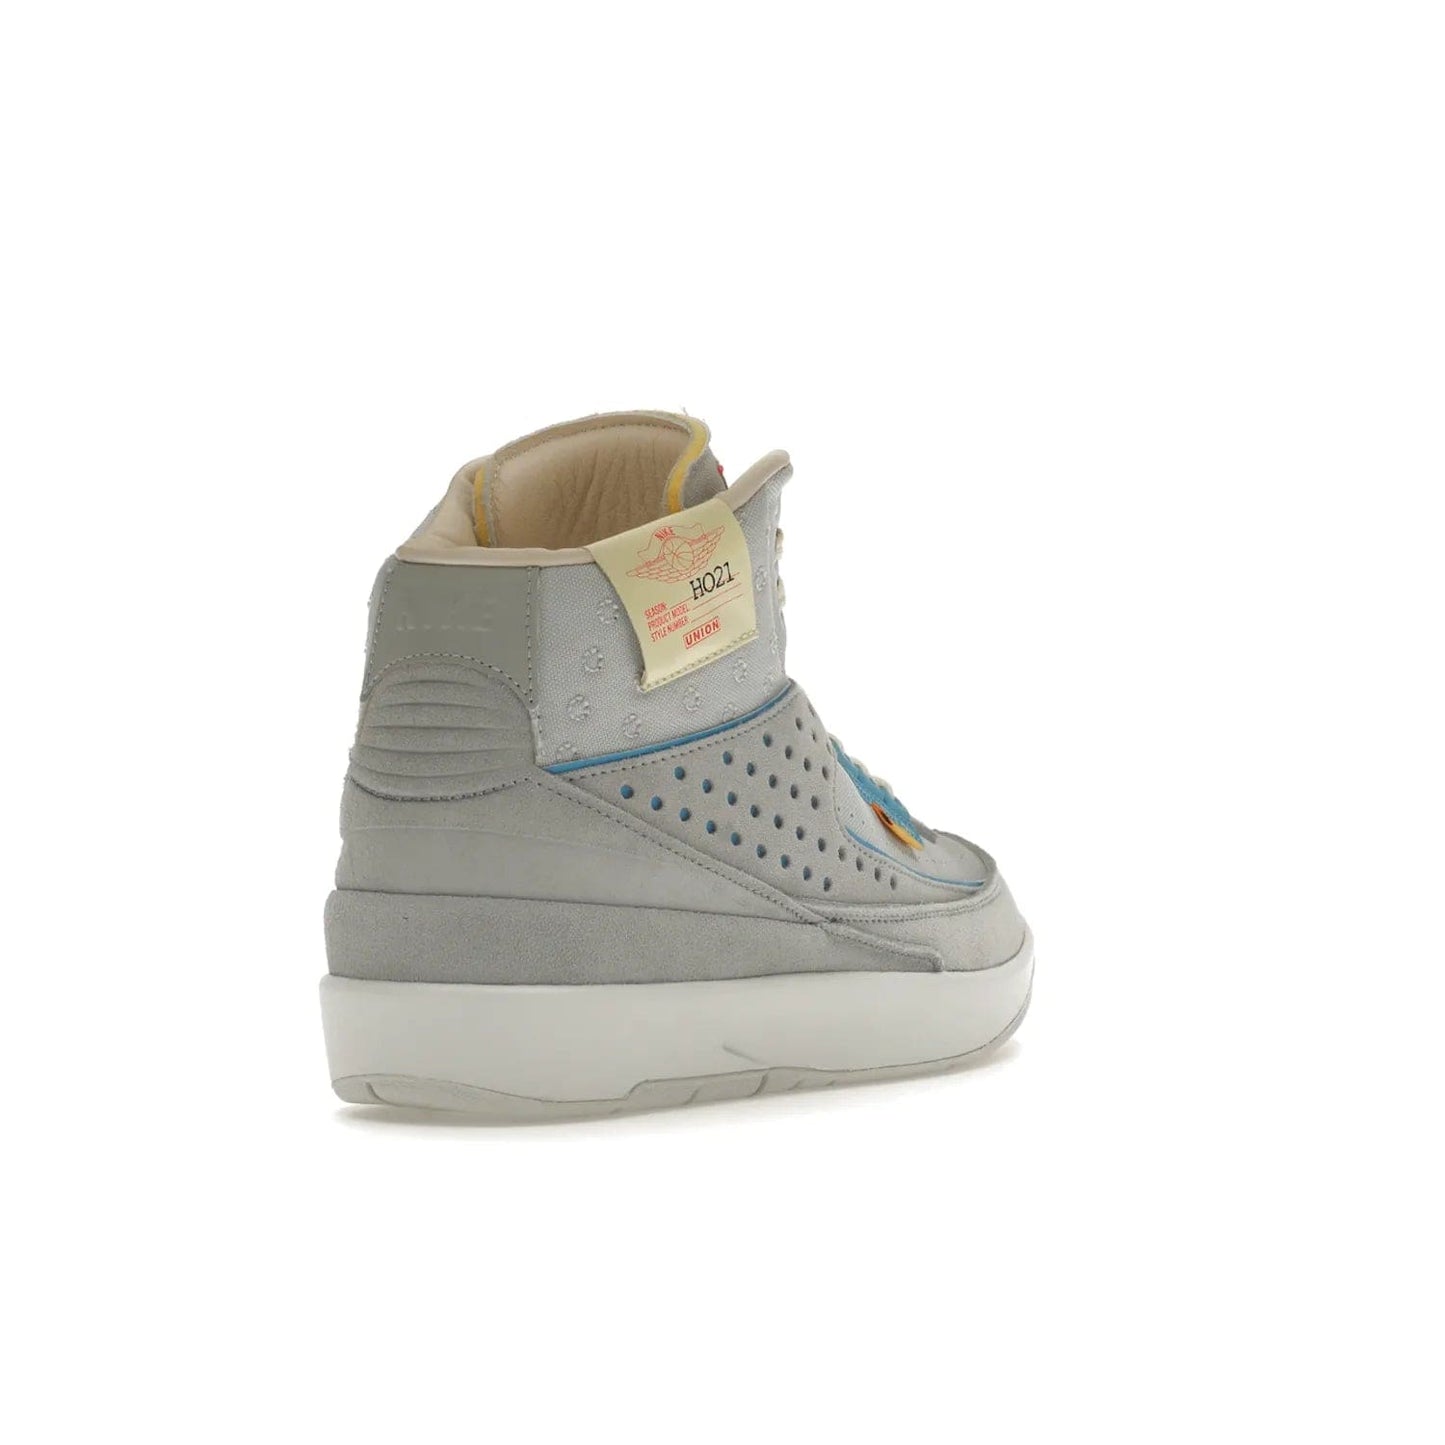 Jordan 2 Retro SP Union Grey Fog - Image 31 - Only at www.BallersClubKickz.com - Introducing the Air Jordan 2 Retro SP Union Grey Fog. This intricate sneaker design features a grey canvas upper with light blue eyelets, eyestay patches, and piping, plus custom external tags. Dropping in April 2022, this exclusive release offers a worn-in look and feel.